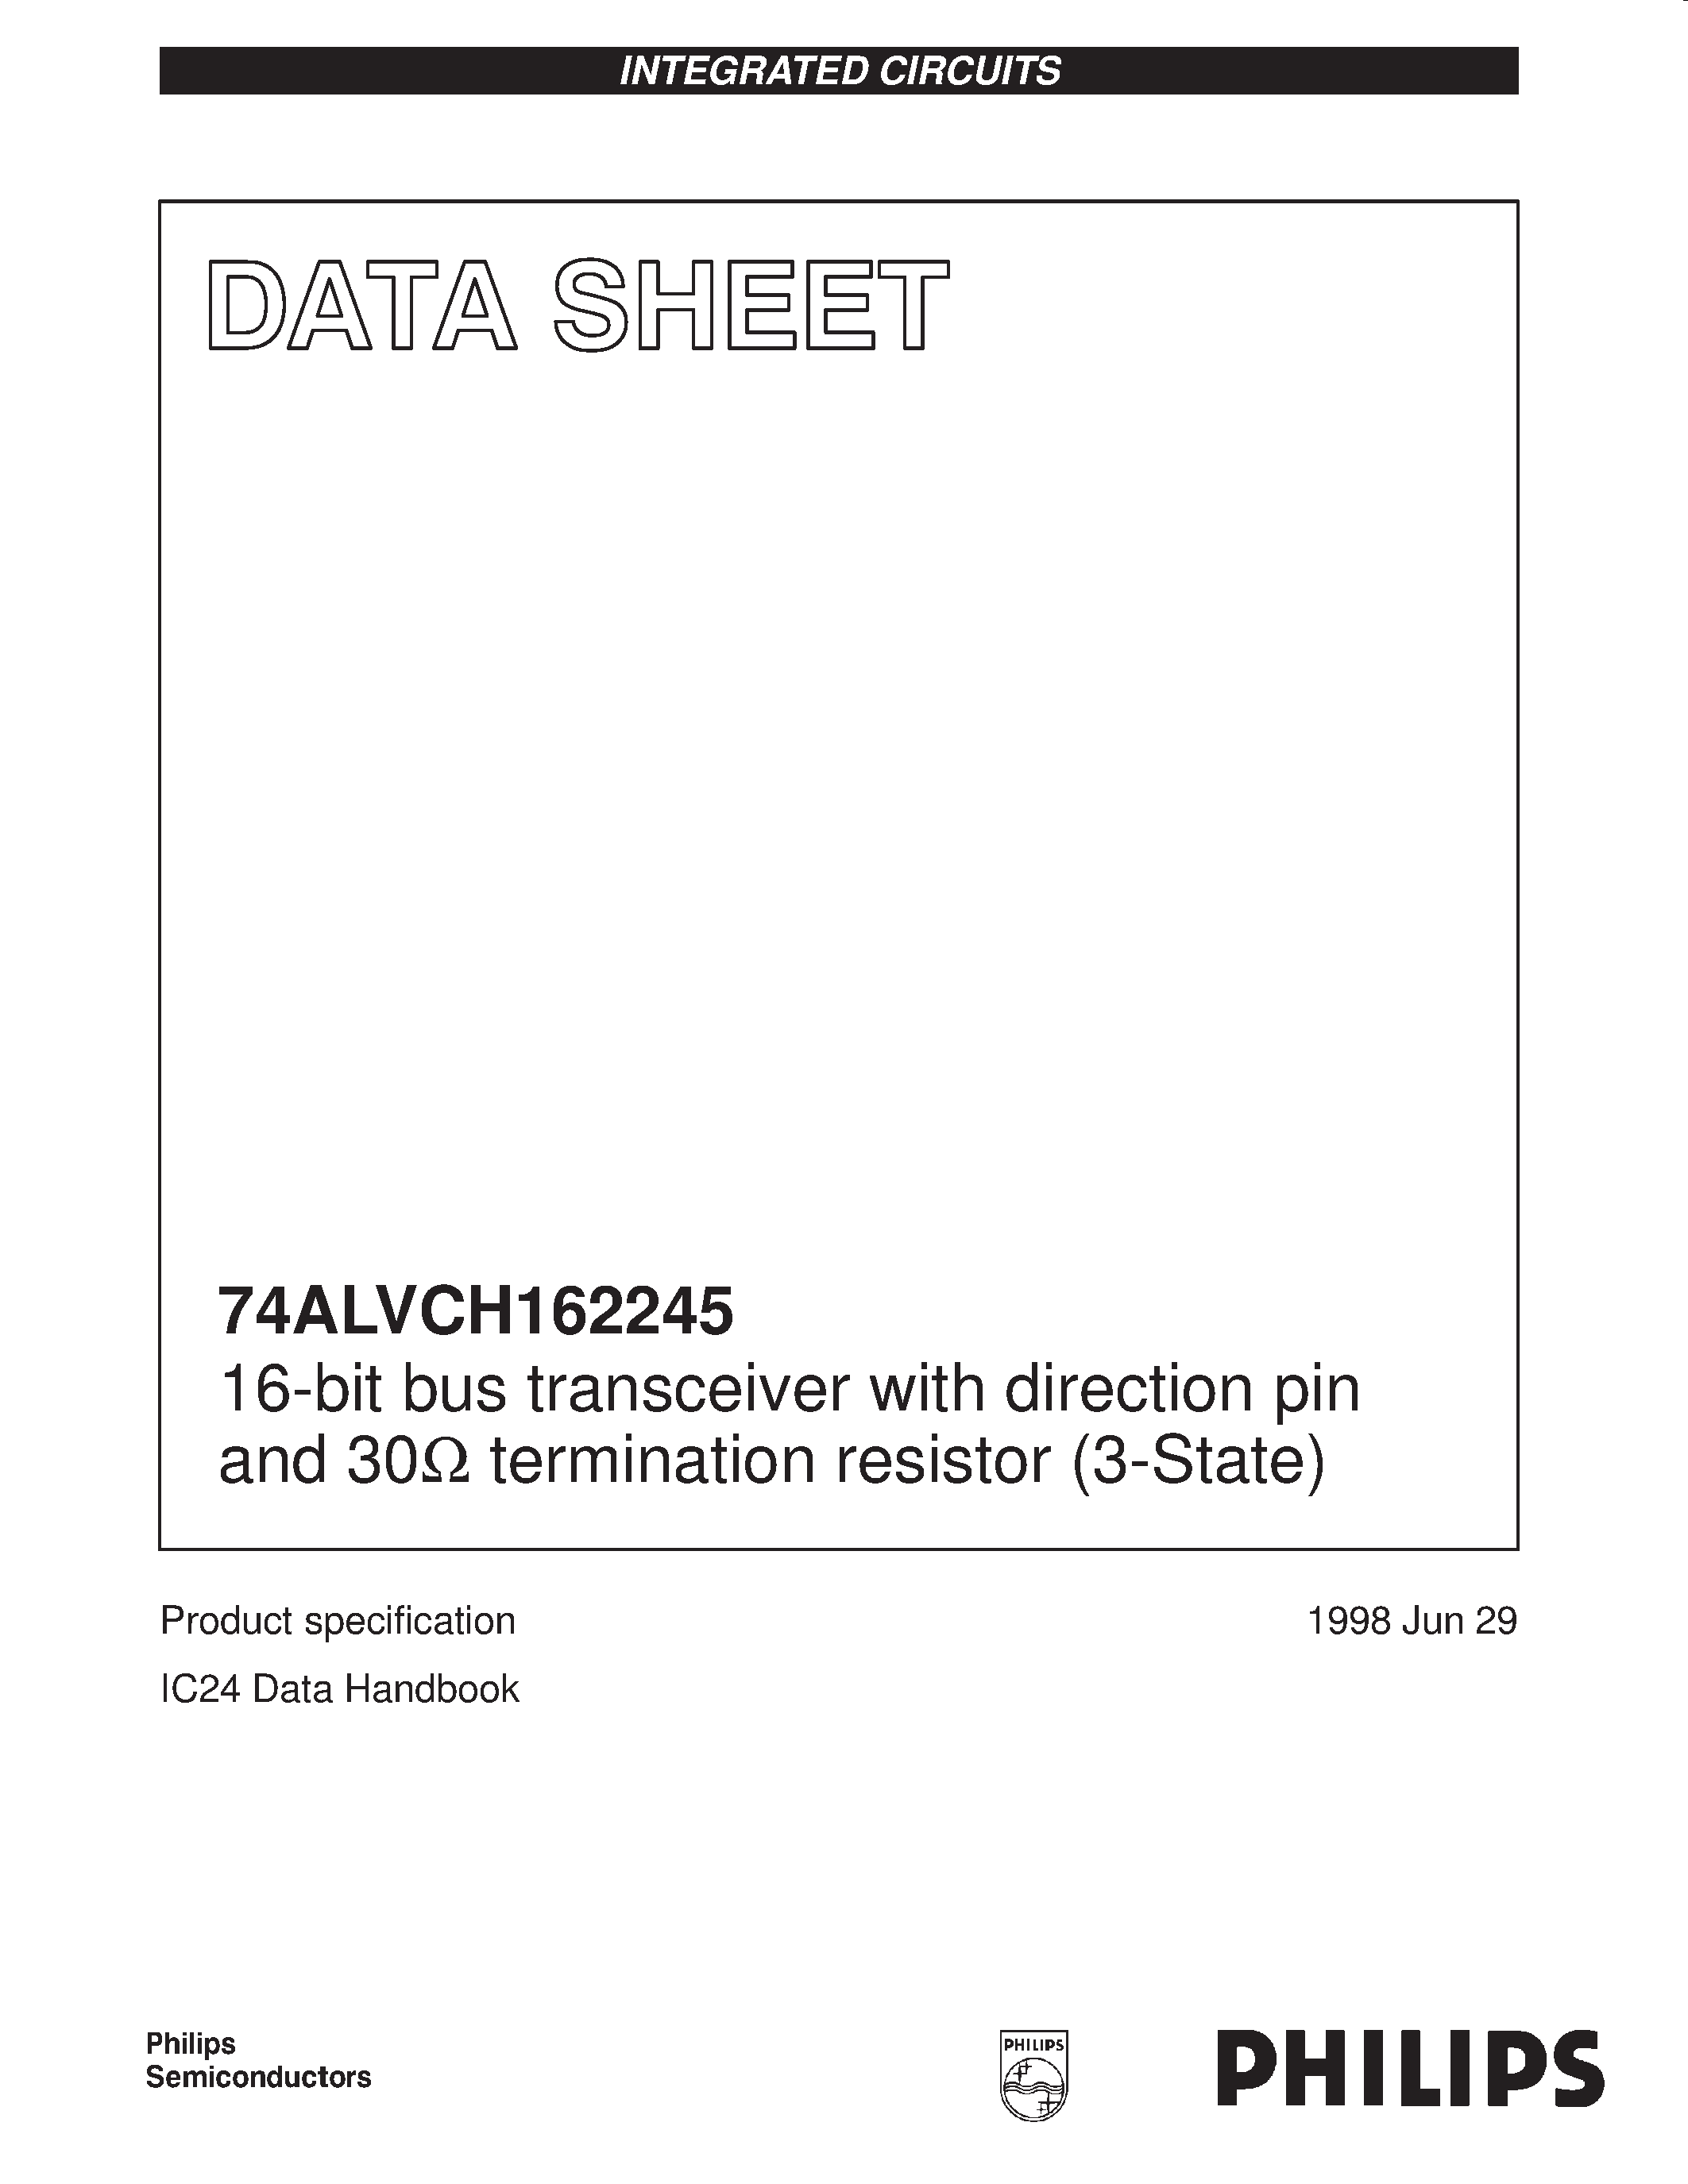 Даташит 74ALVCH162245DL-16-bit bus transceiver with direction pin and 30ohm termination resistor 3-State страница 1